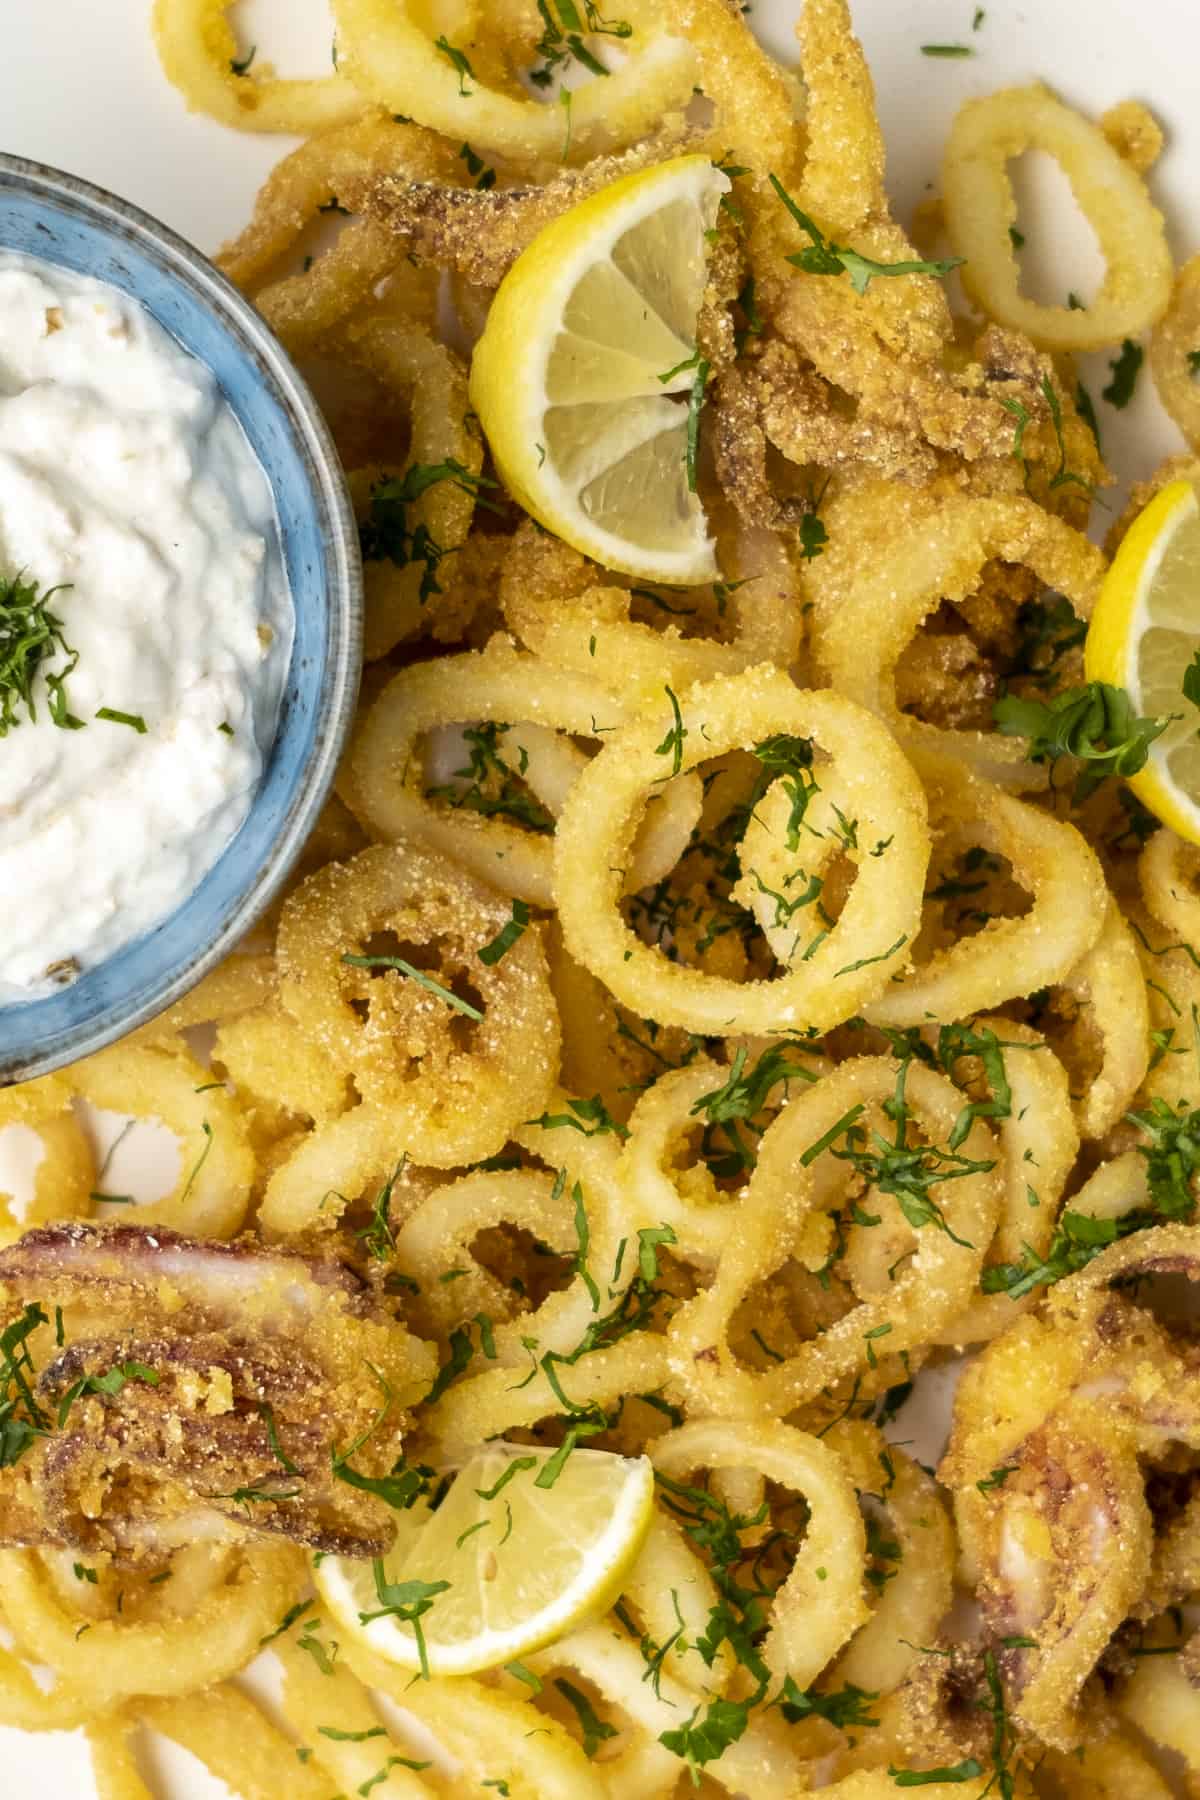 Fried calamari garnished with chopped parsley and lemon slices served with a mayo sauce on the side.